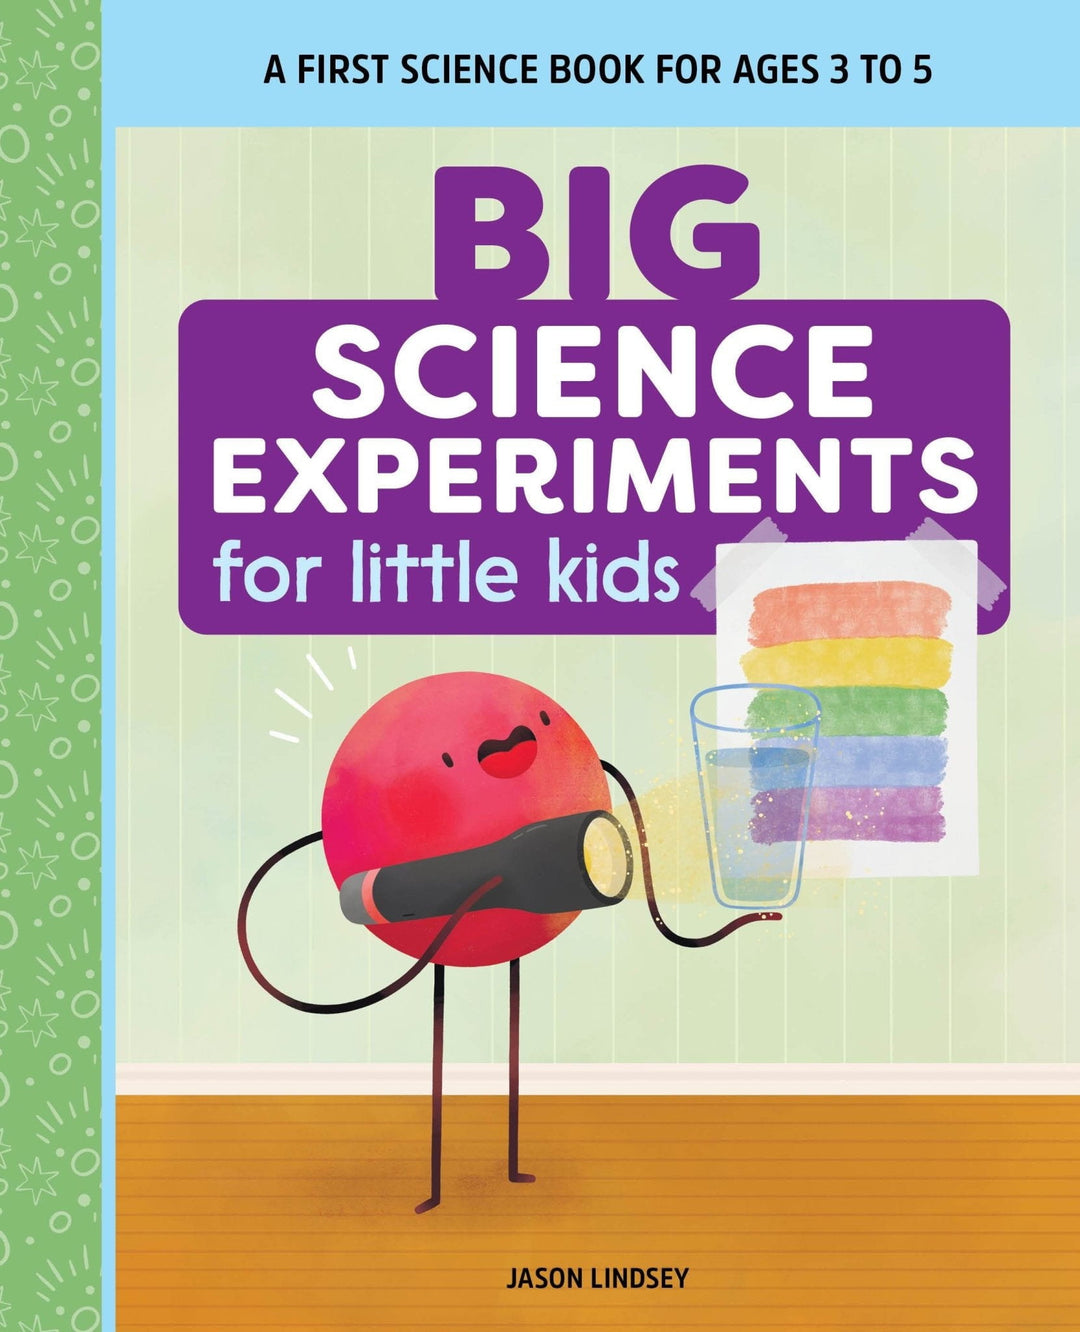 Hooked on Science: Big Science Experiments for Little Kids - Hooked on Science - STEMfinity